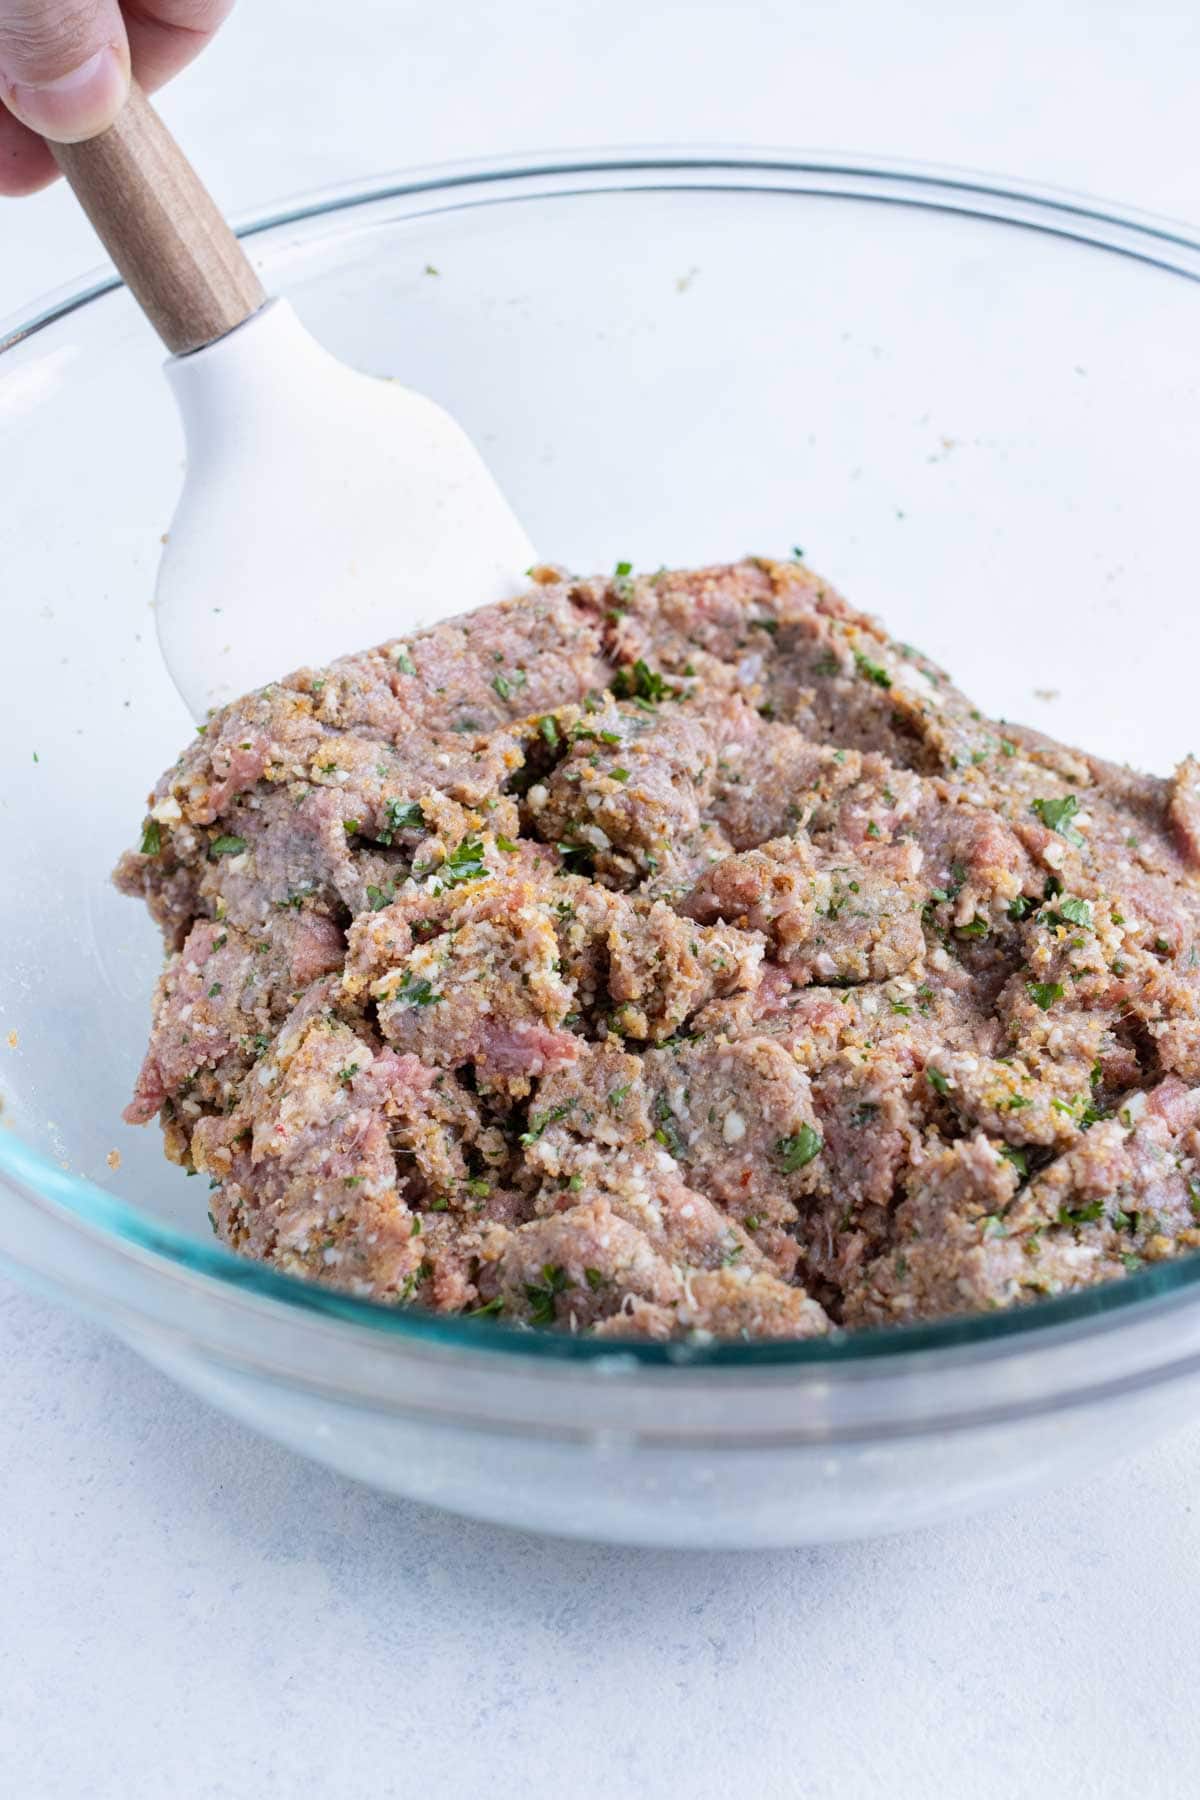 Meatball ingredients are combined in a glass bowl.